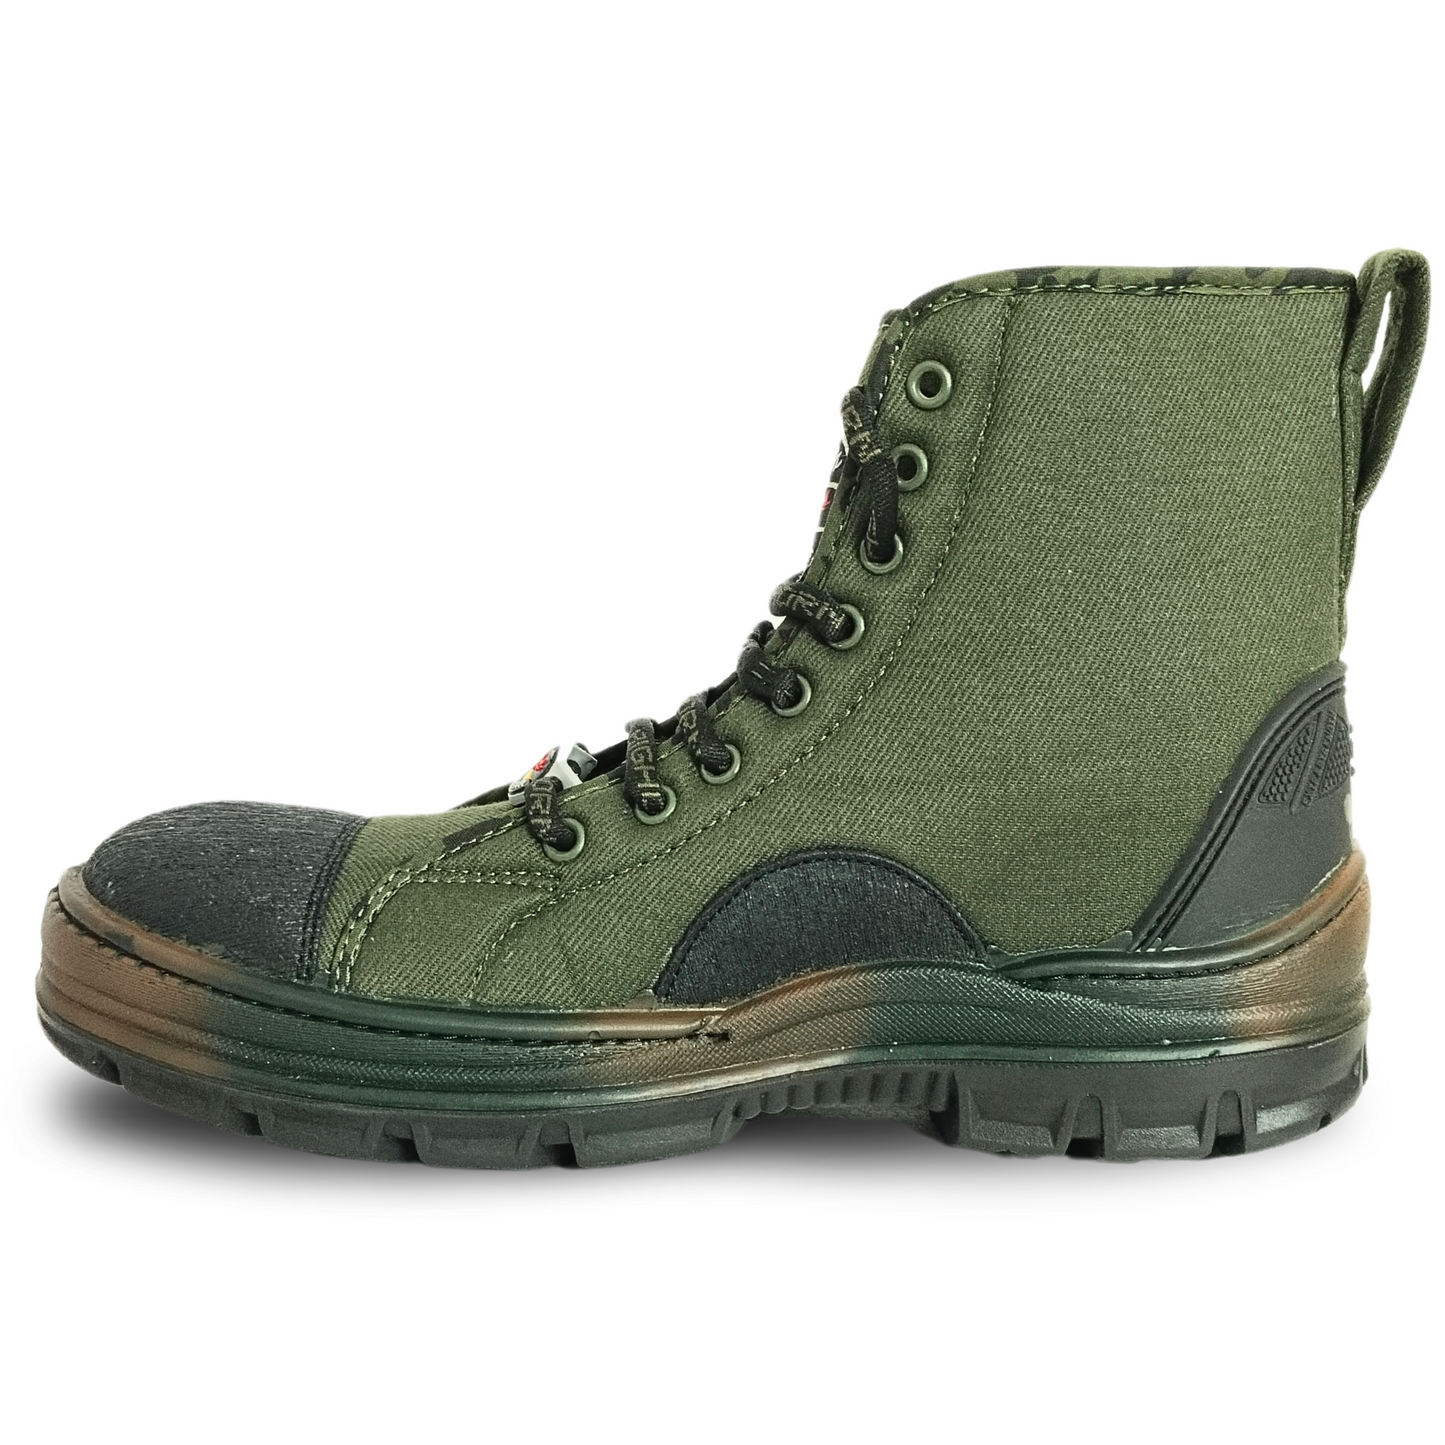 LIBERTY BigHorn King Jungle Shoe PU Sole Olive Green Defence Military Boot